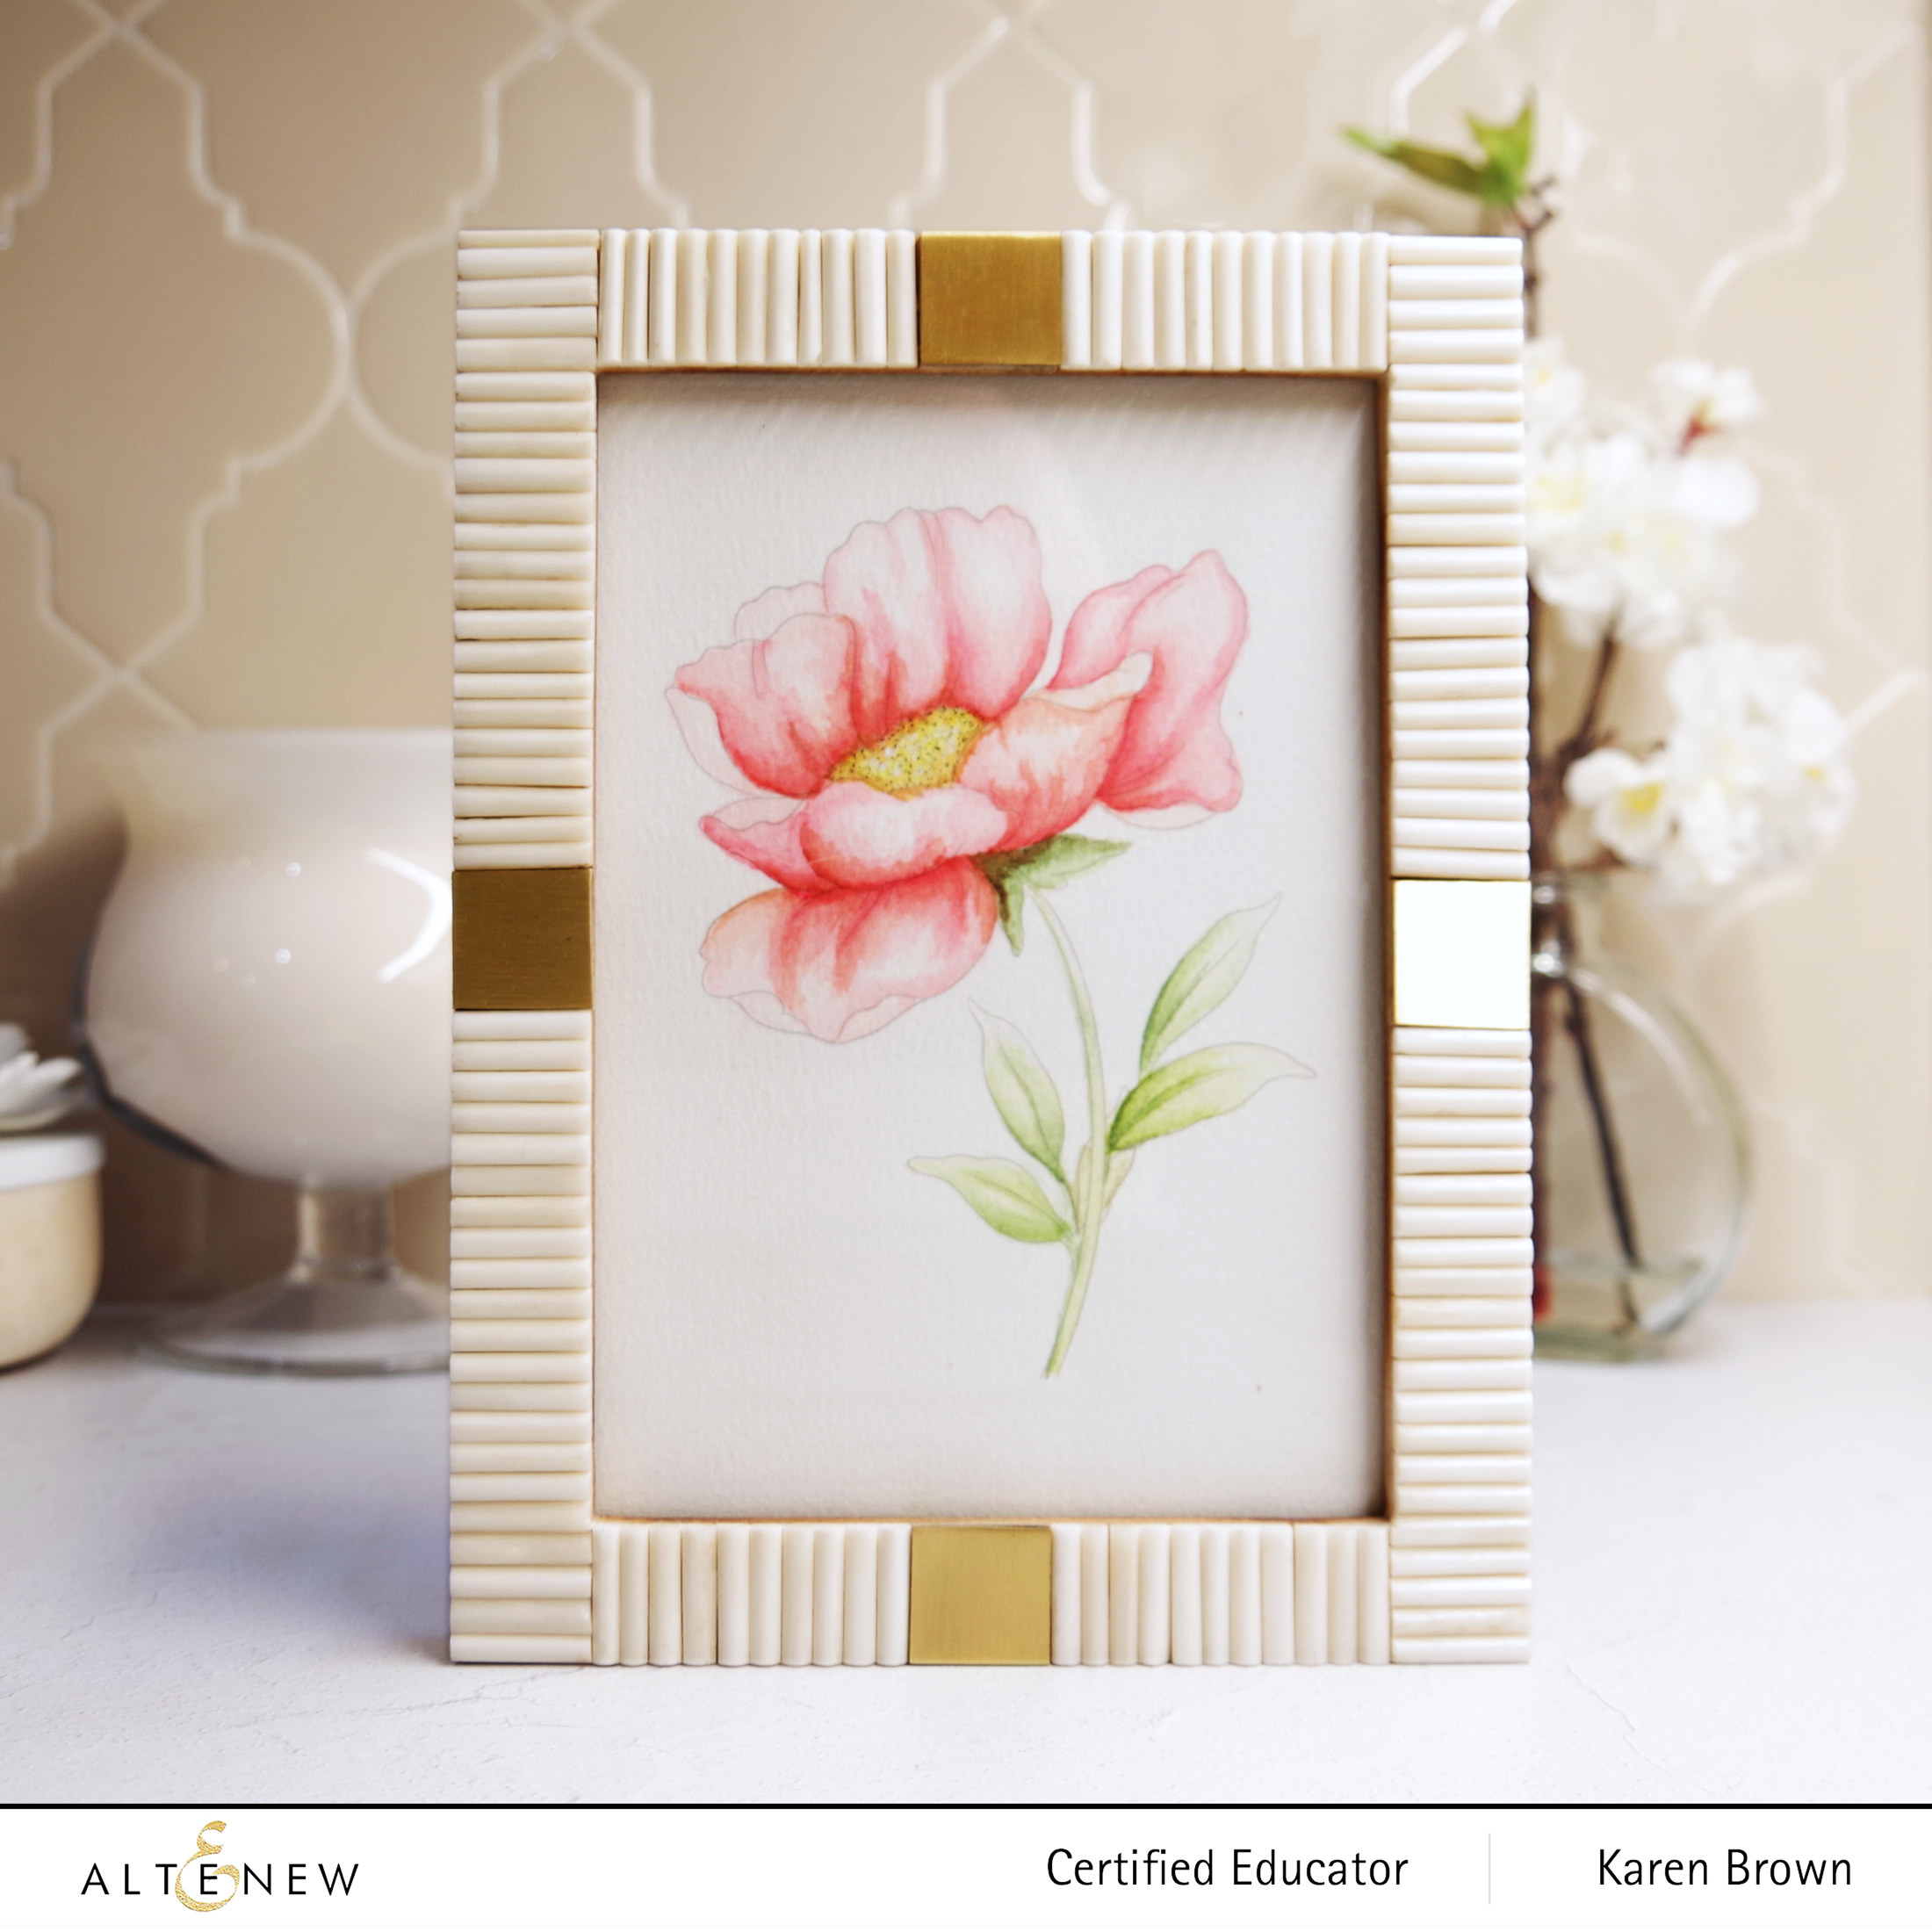  Framed watercolor Poppy from Altenew's Watercolor Coloring Book